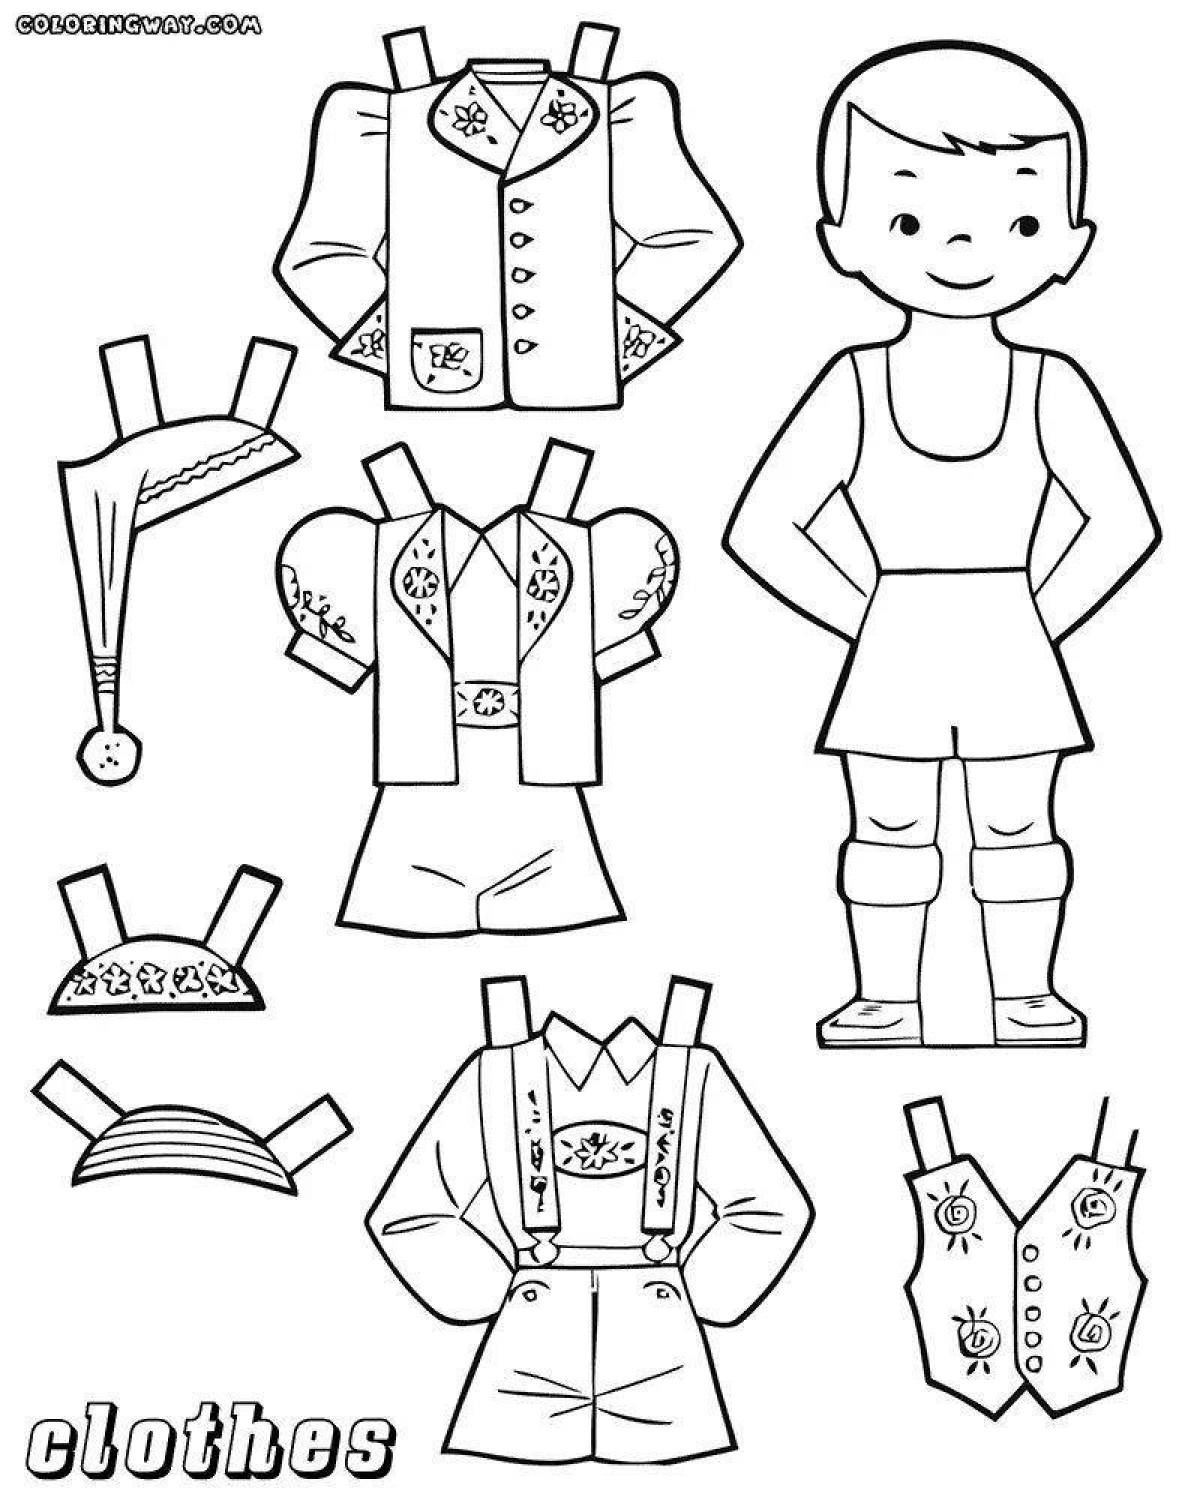 Coloring for children's costumes